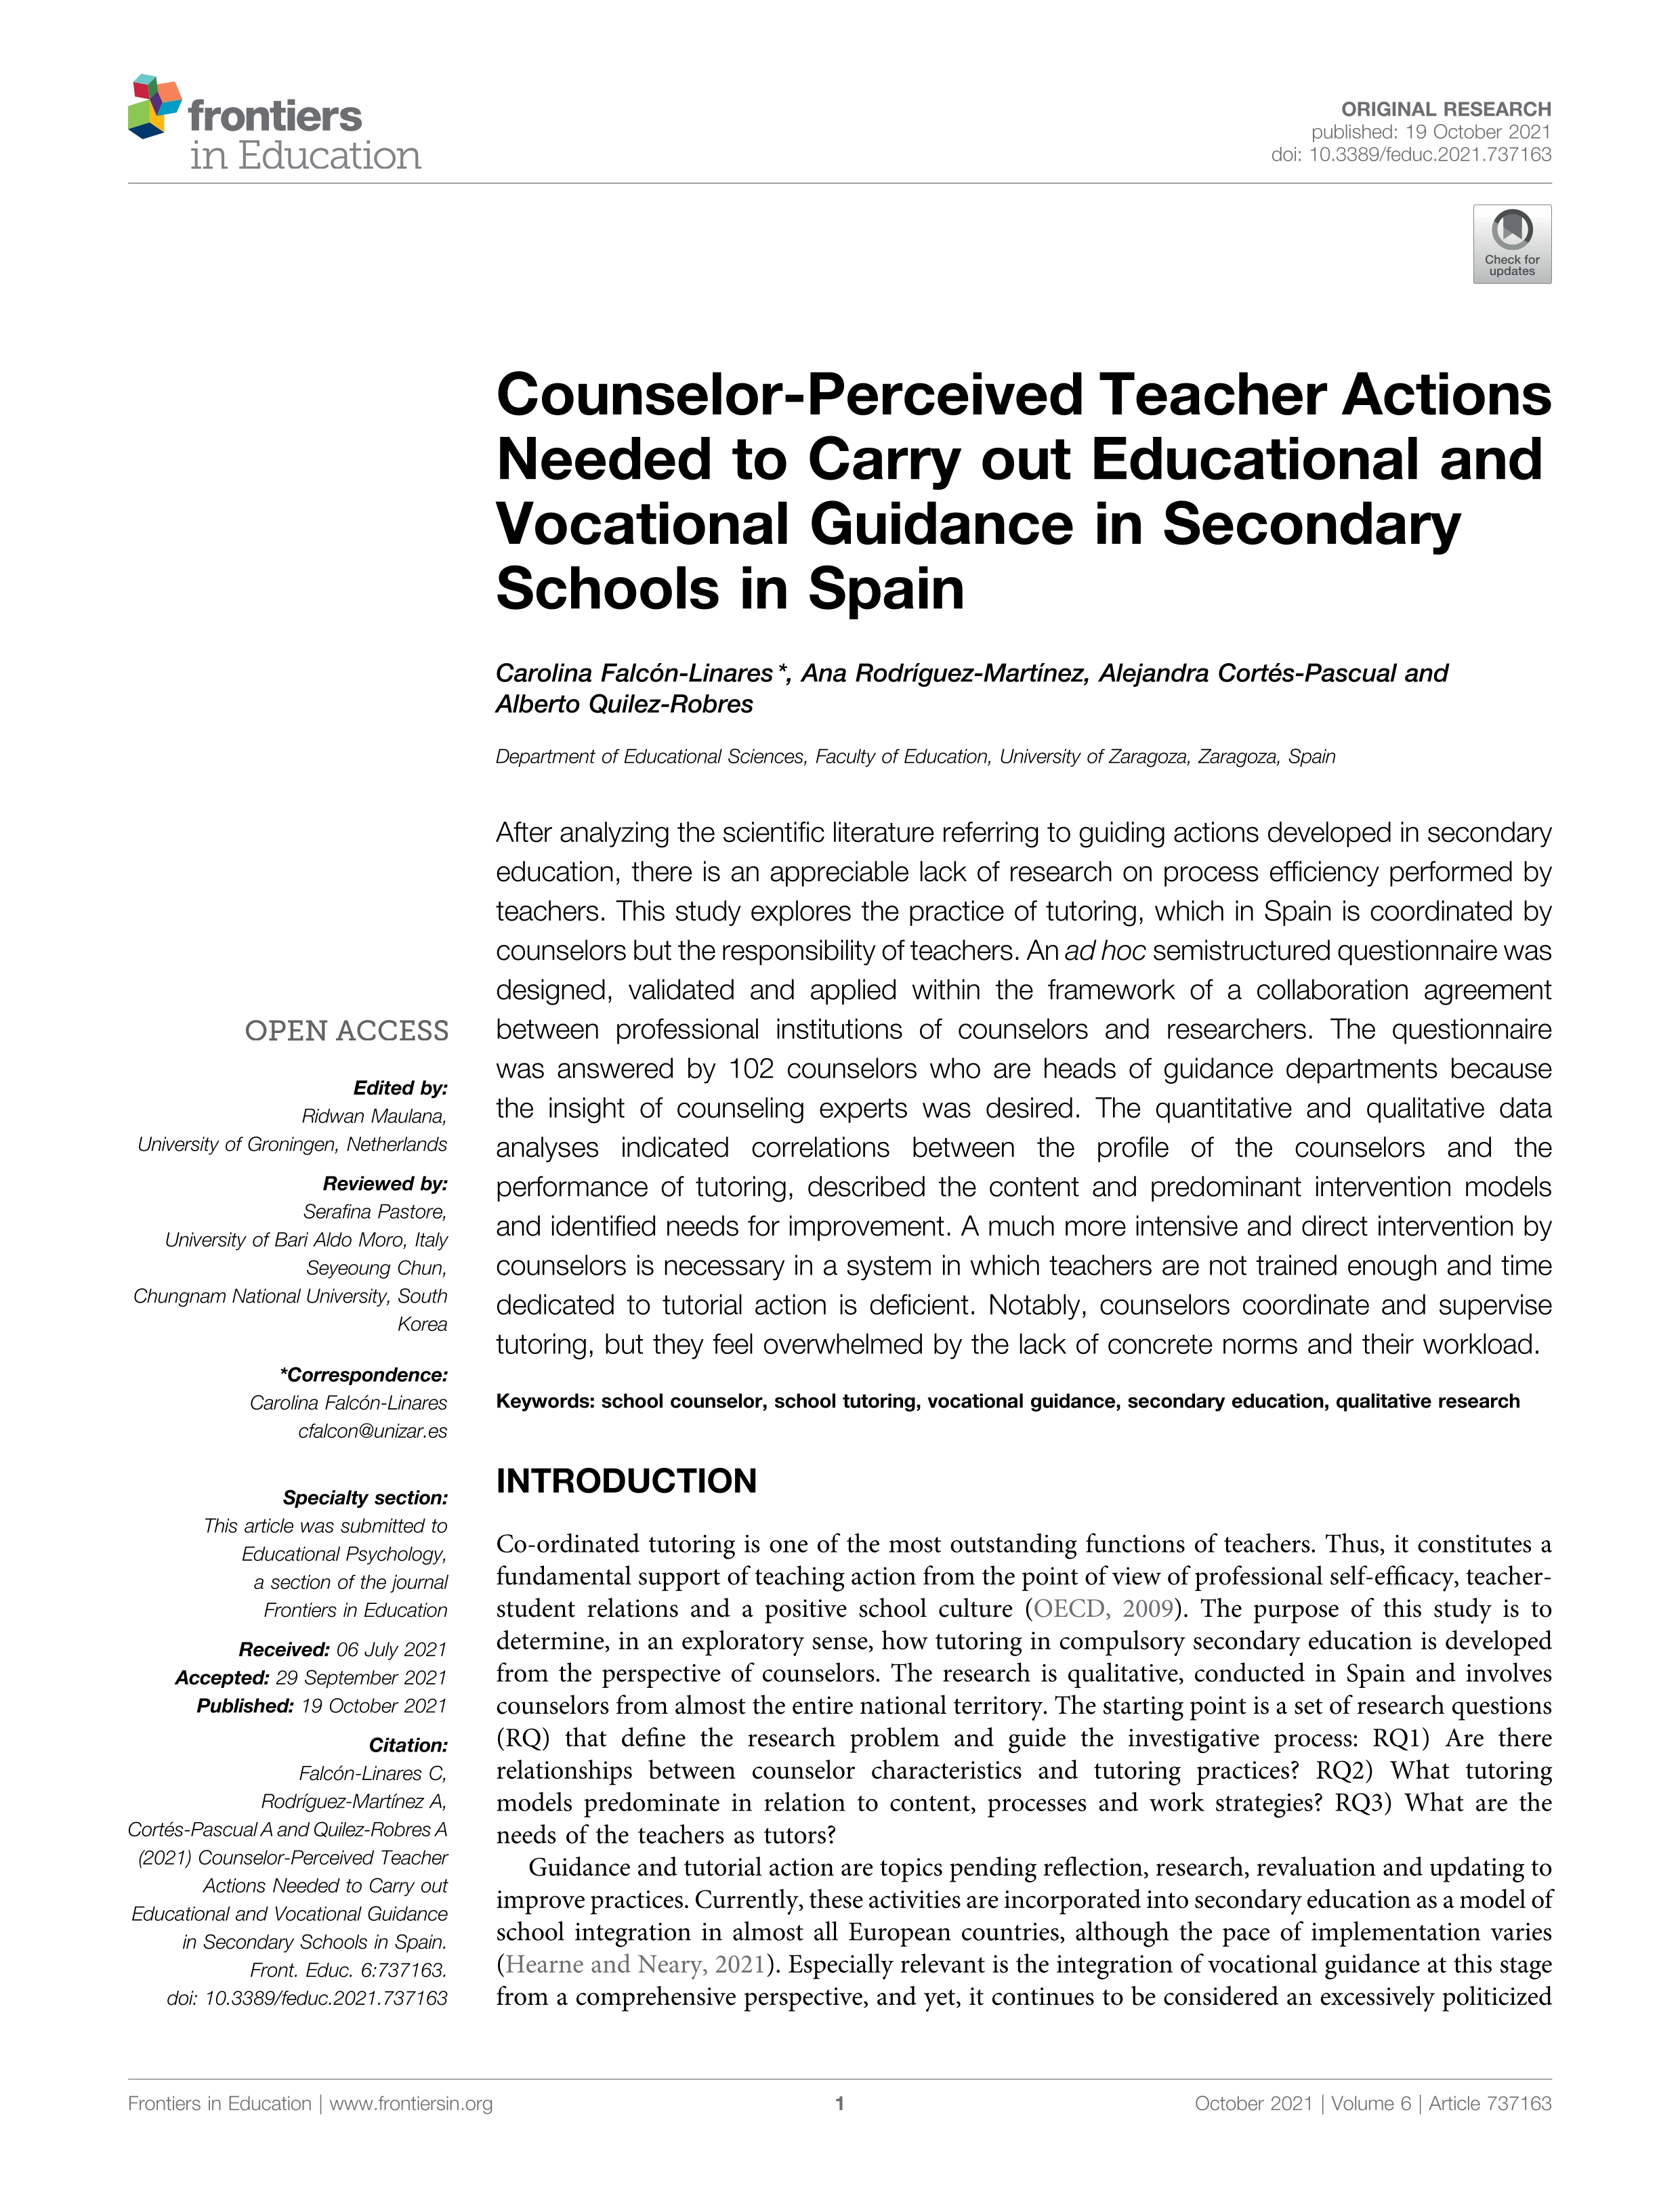 Counselor-Perceived Teacher Actions Needed to Carry out Educational and Vocational Guidance in Secondary Schools in Spain